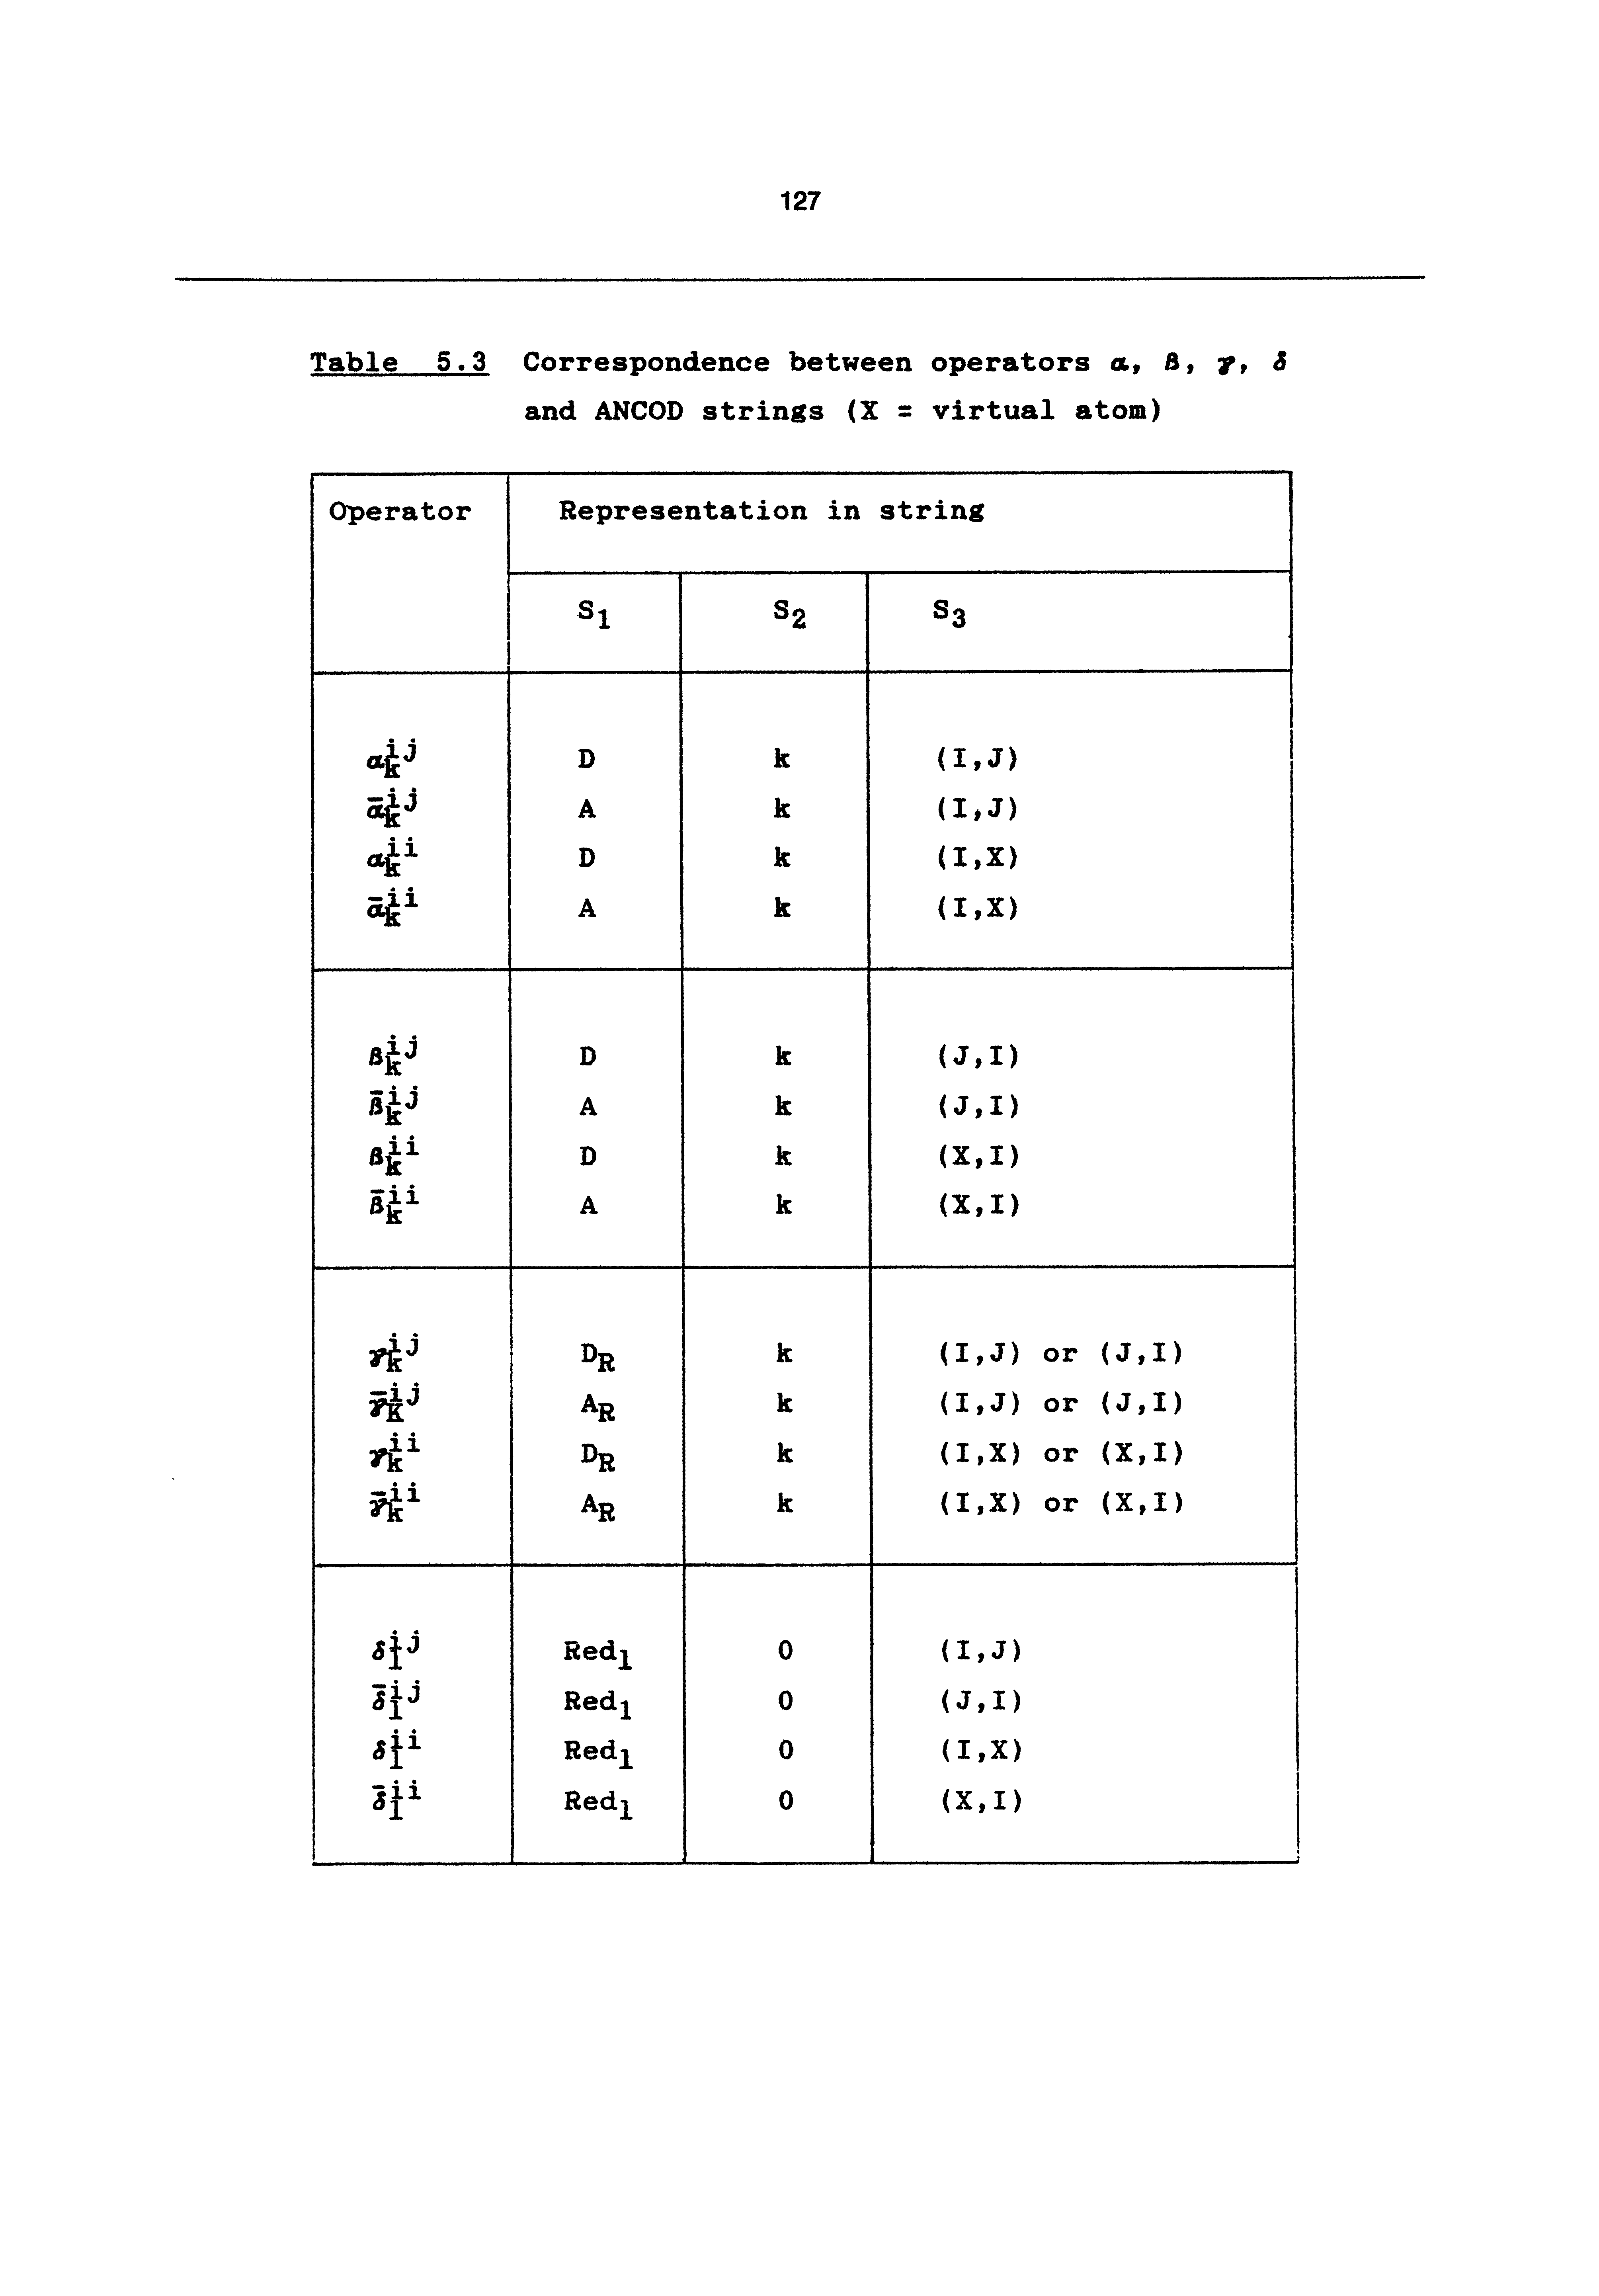 Table 5.3 Correspondence between operators a, B, y, S and ANCOD strings (X = virtual atom)...